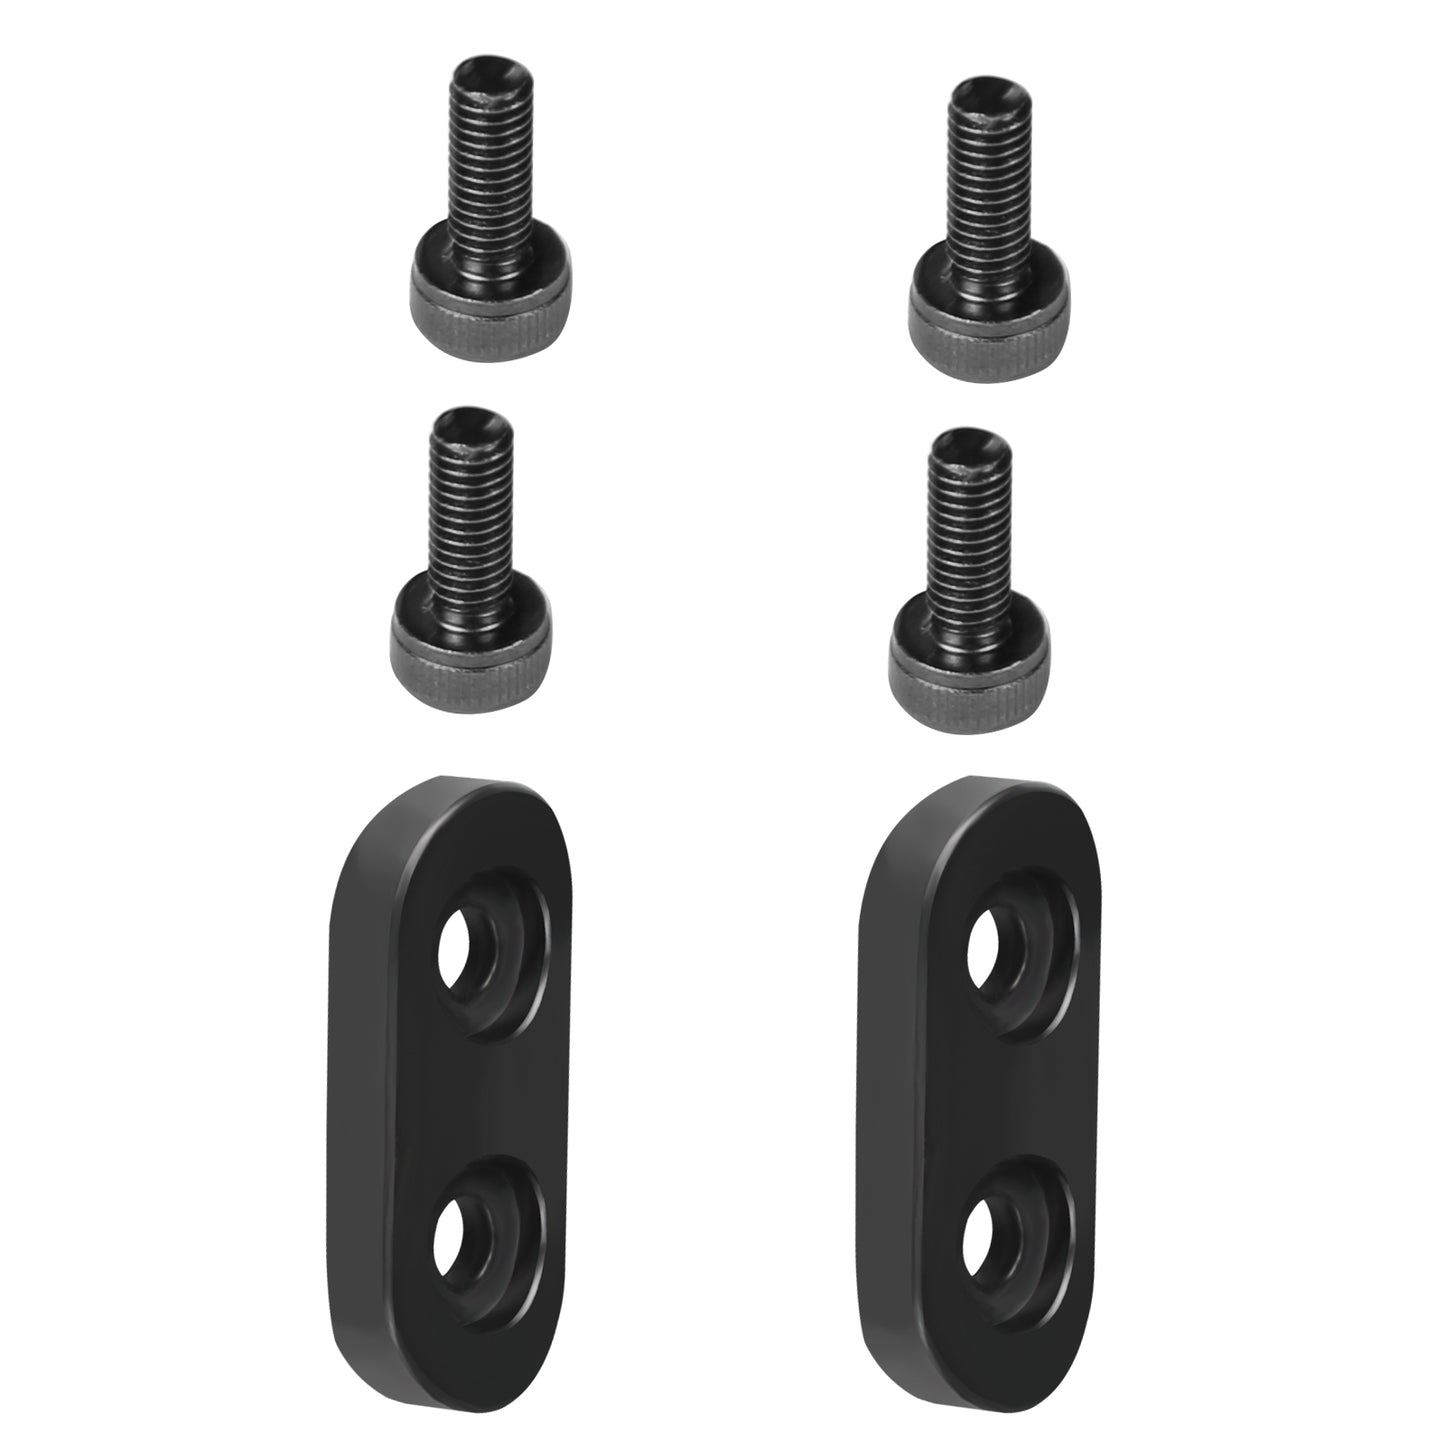 OMP M7 Tail Boom Protector Set